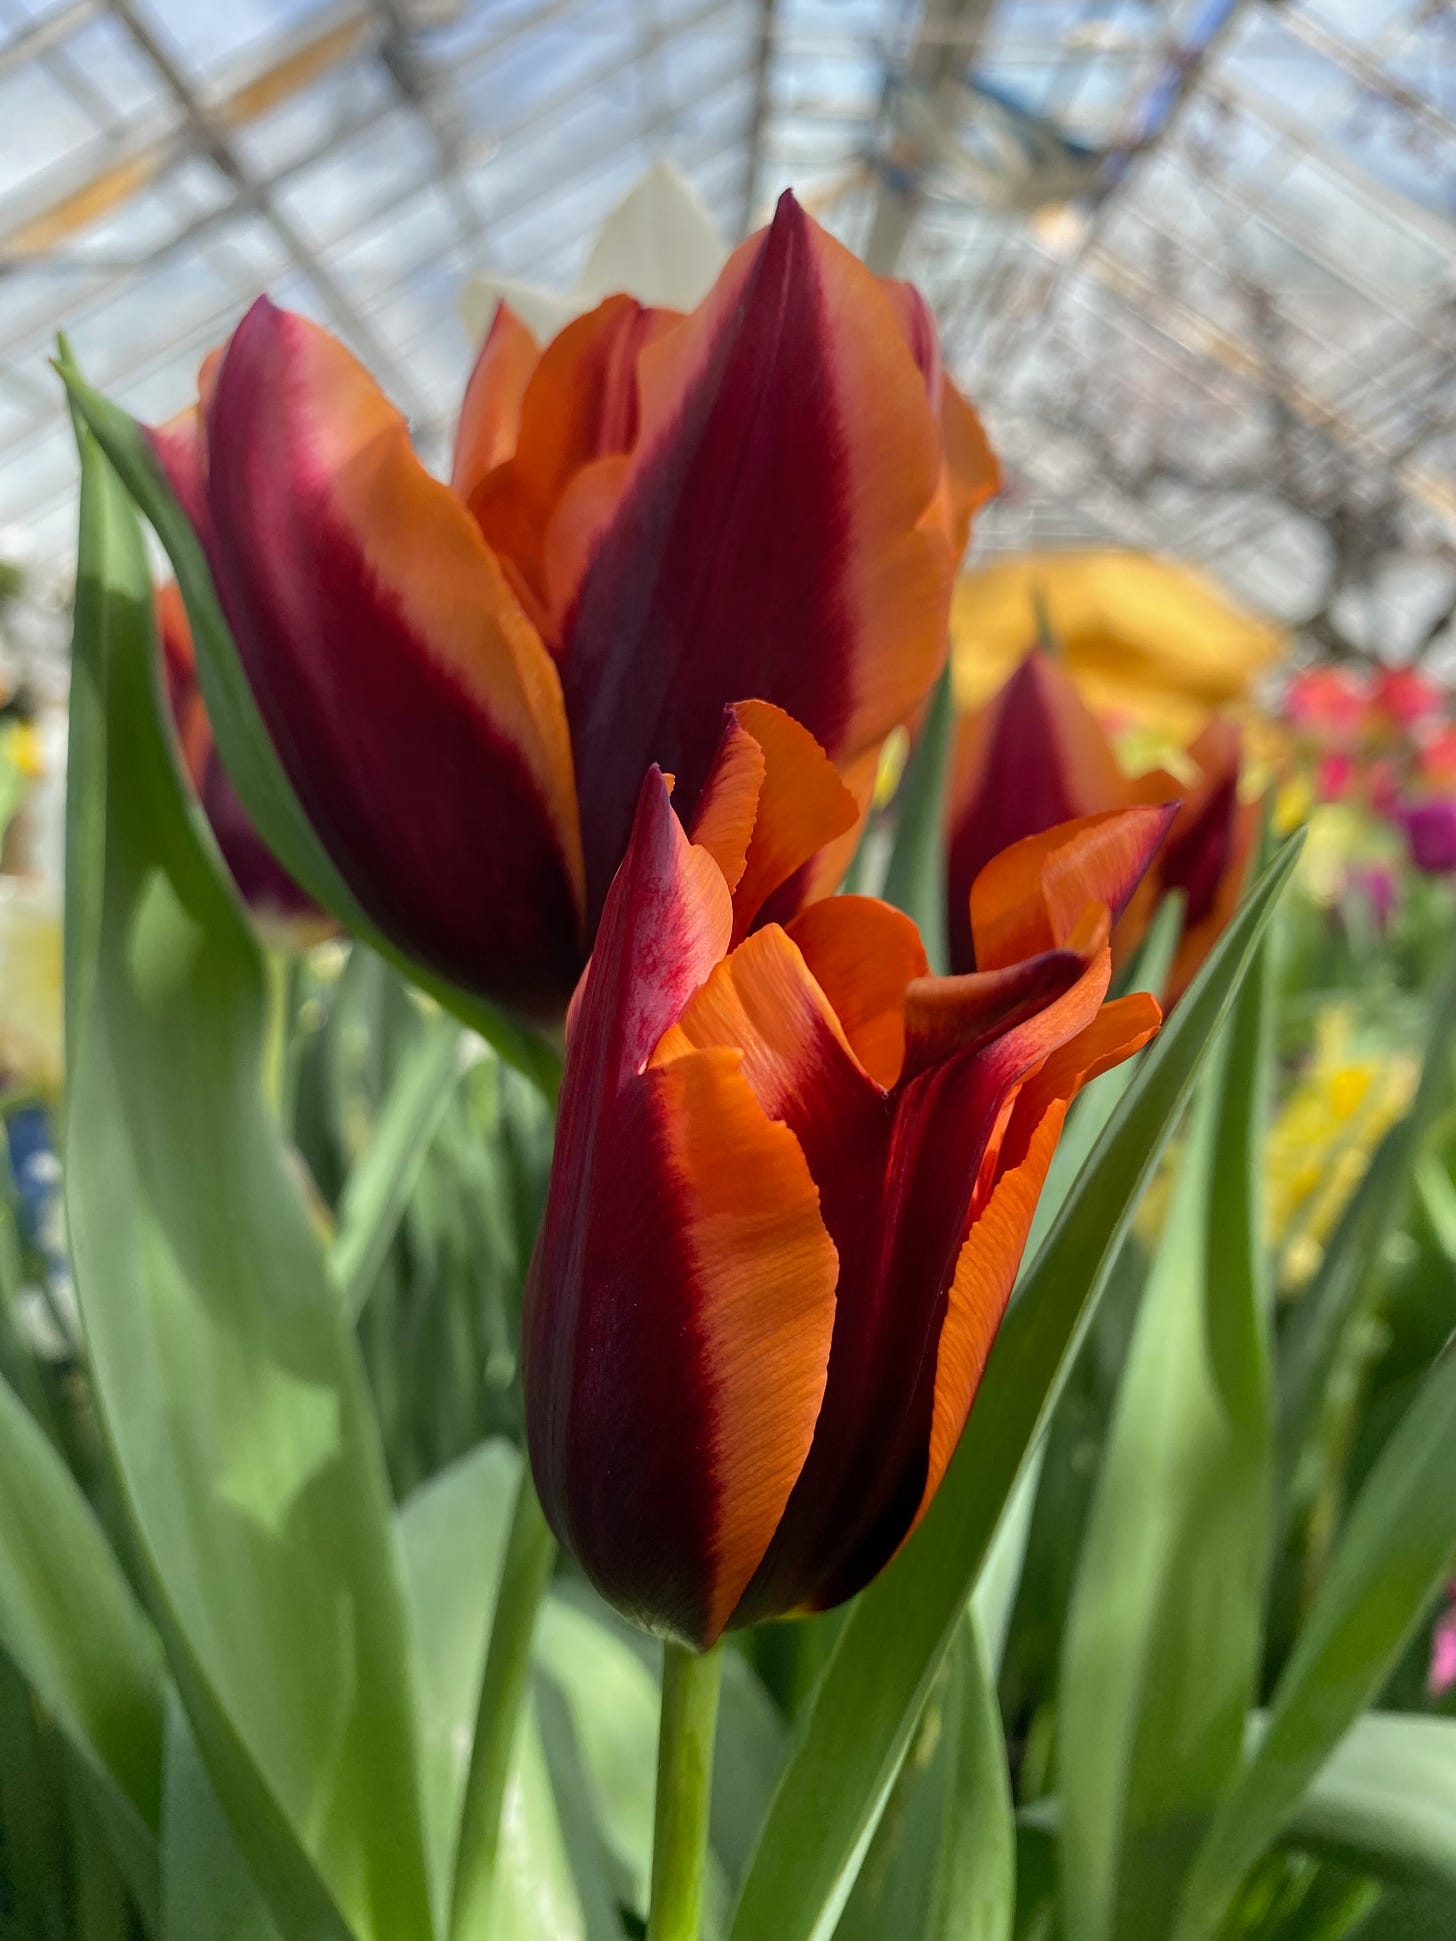 Close up of several pointy red, pink, and orange patterned tulips.